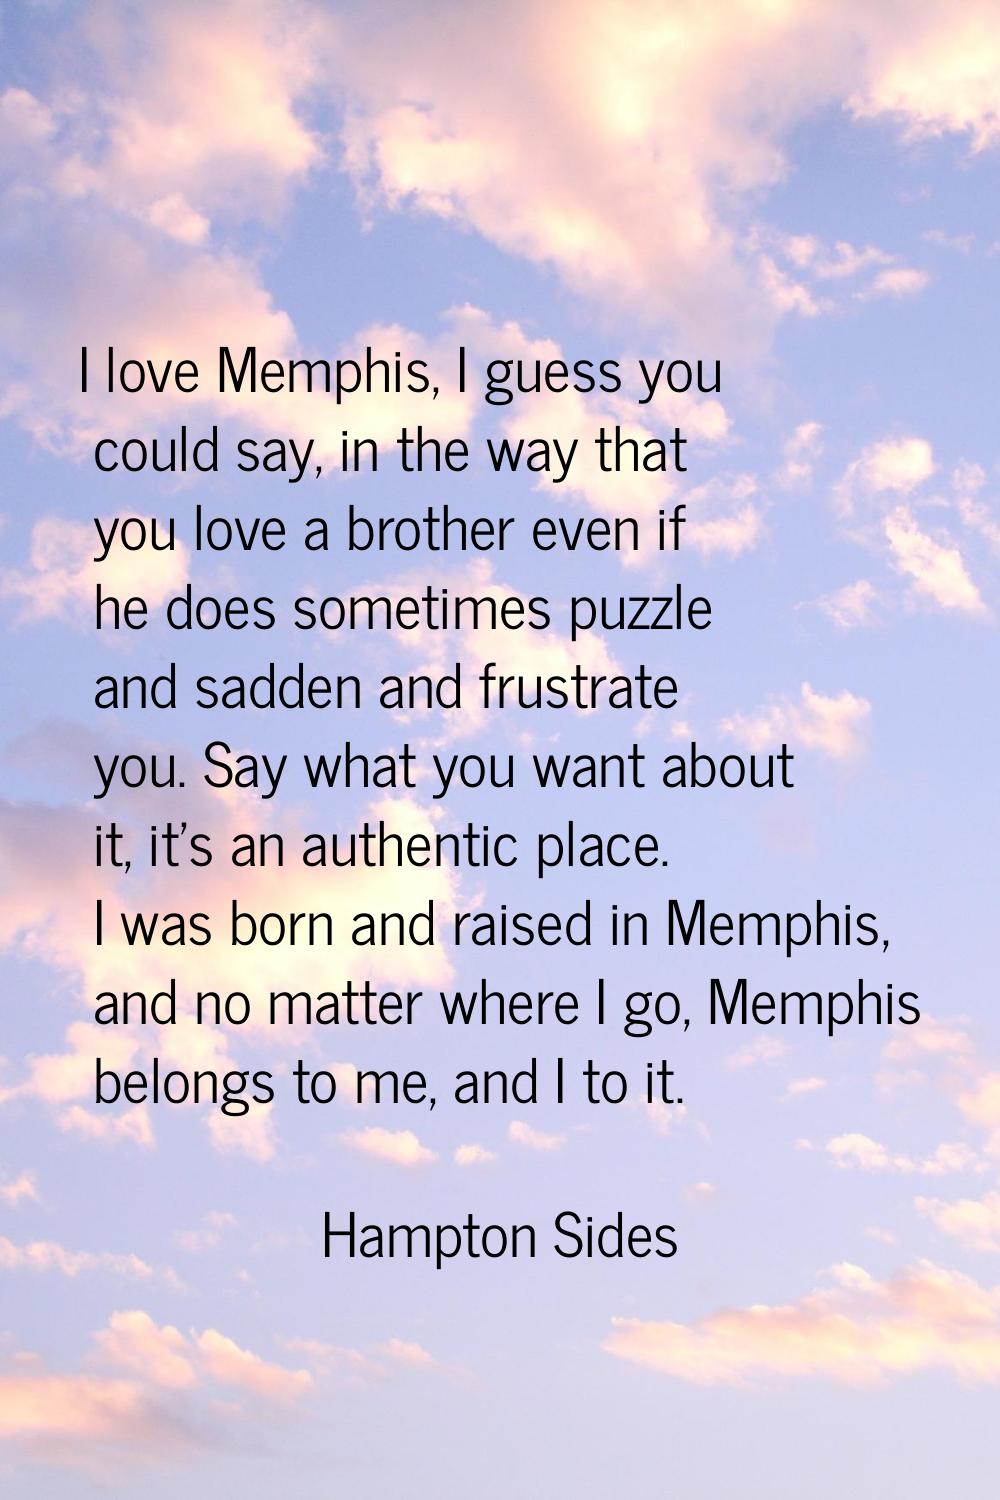 I love Memphis, I guess you could say, in the way that you love a brother even if he does sometimes